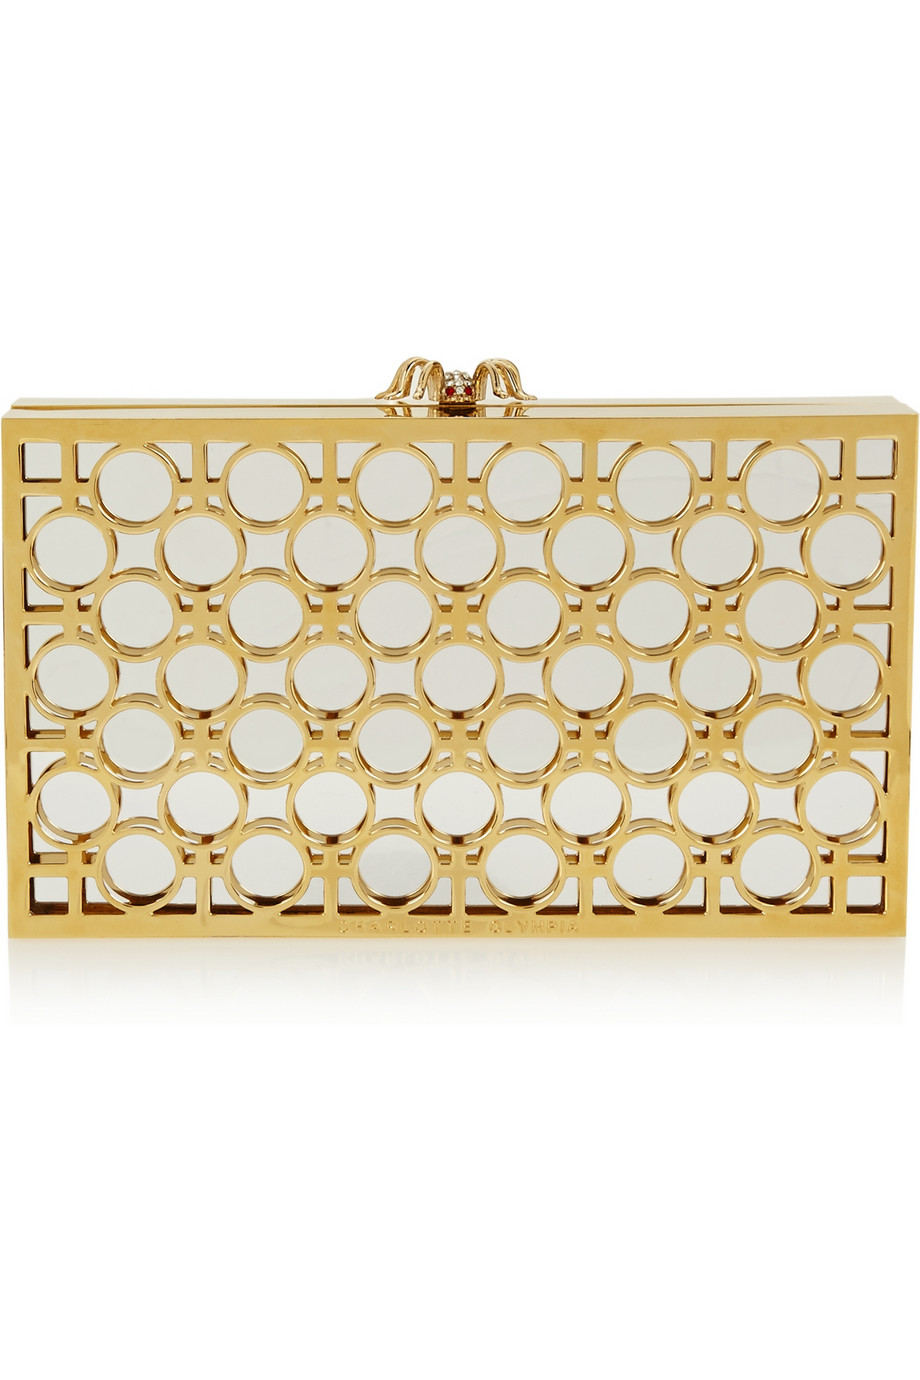   Charlotte Olympia  clutch - was $1,895, now $1,327 